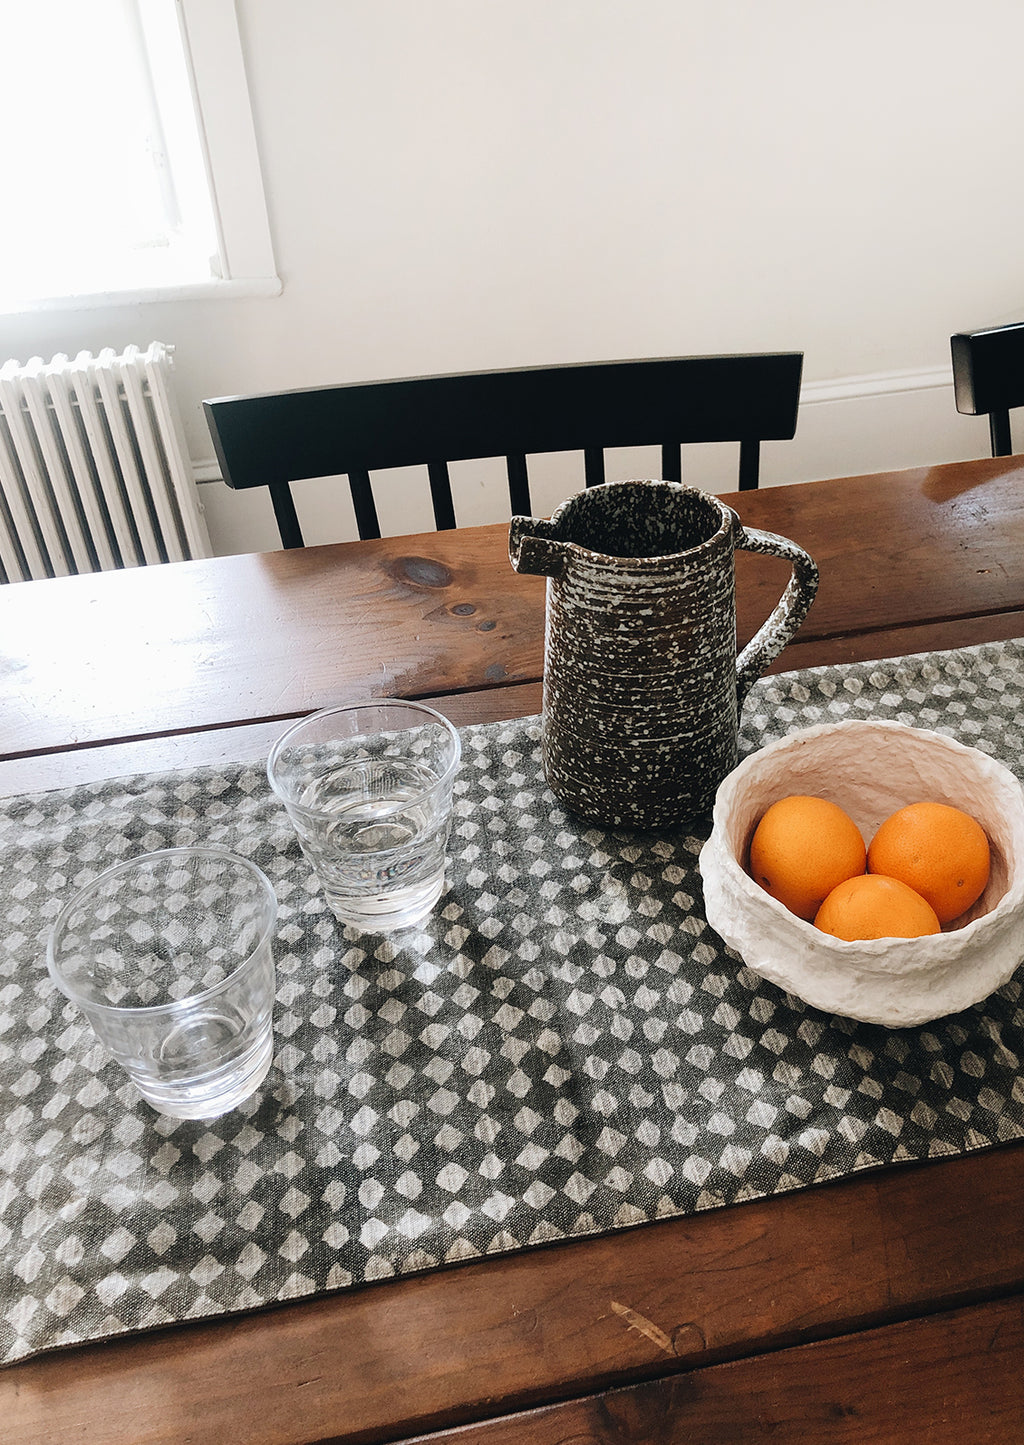 4: Dining table with table runner, water glasses, pitcher and bowl of oranges